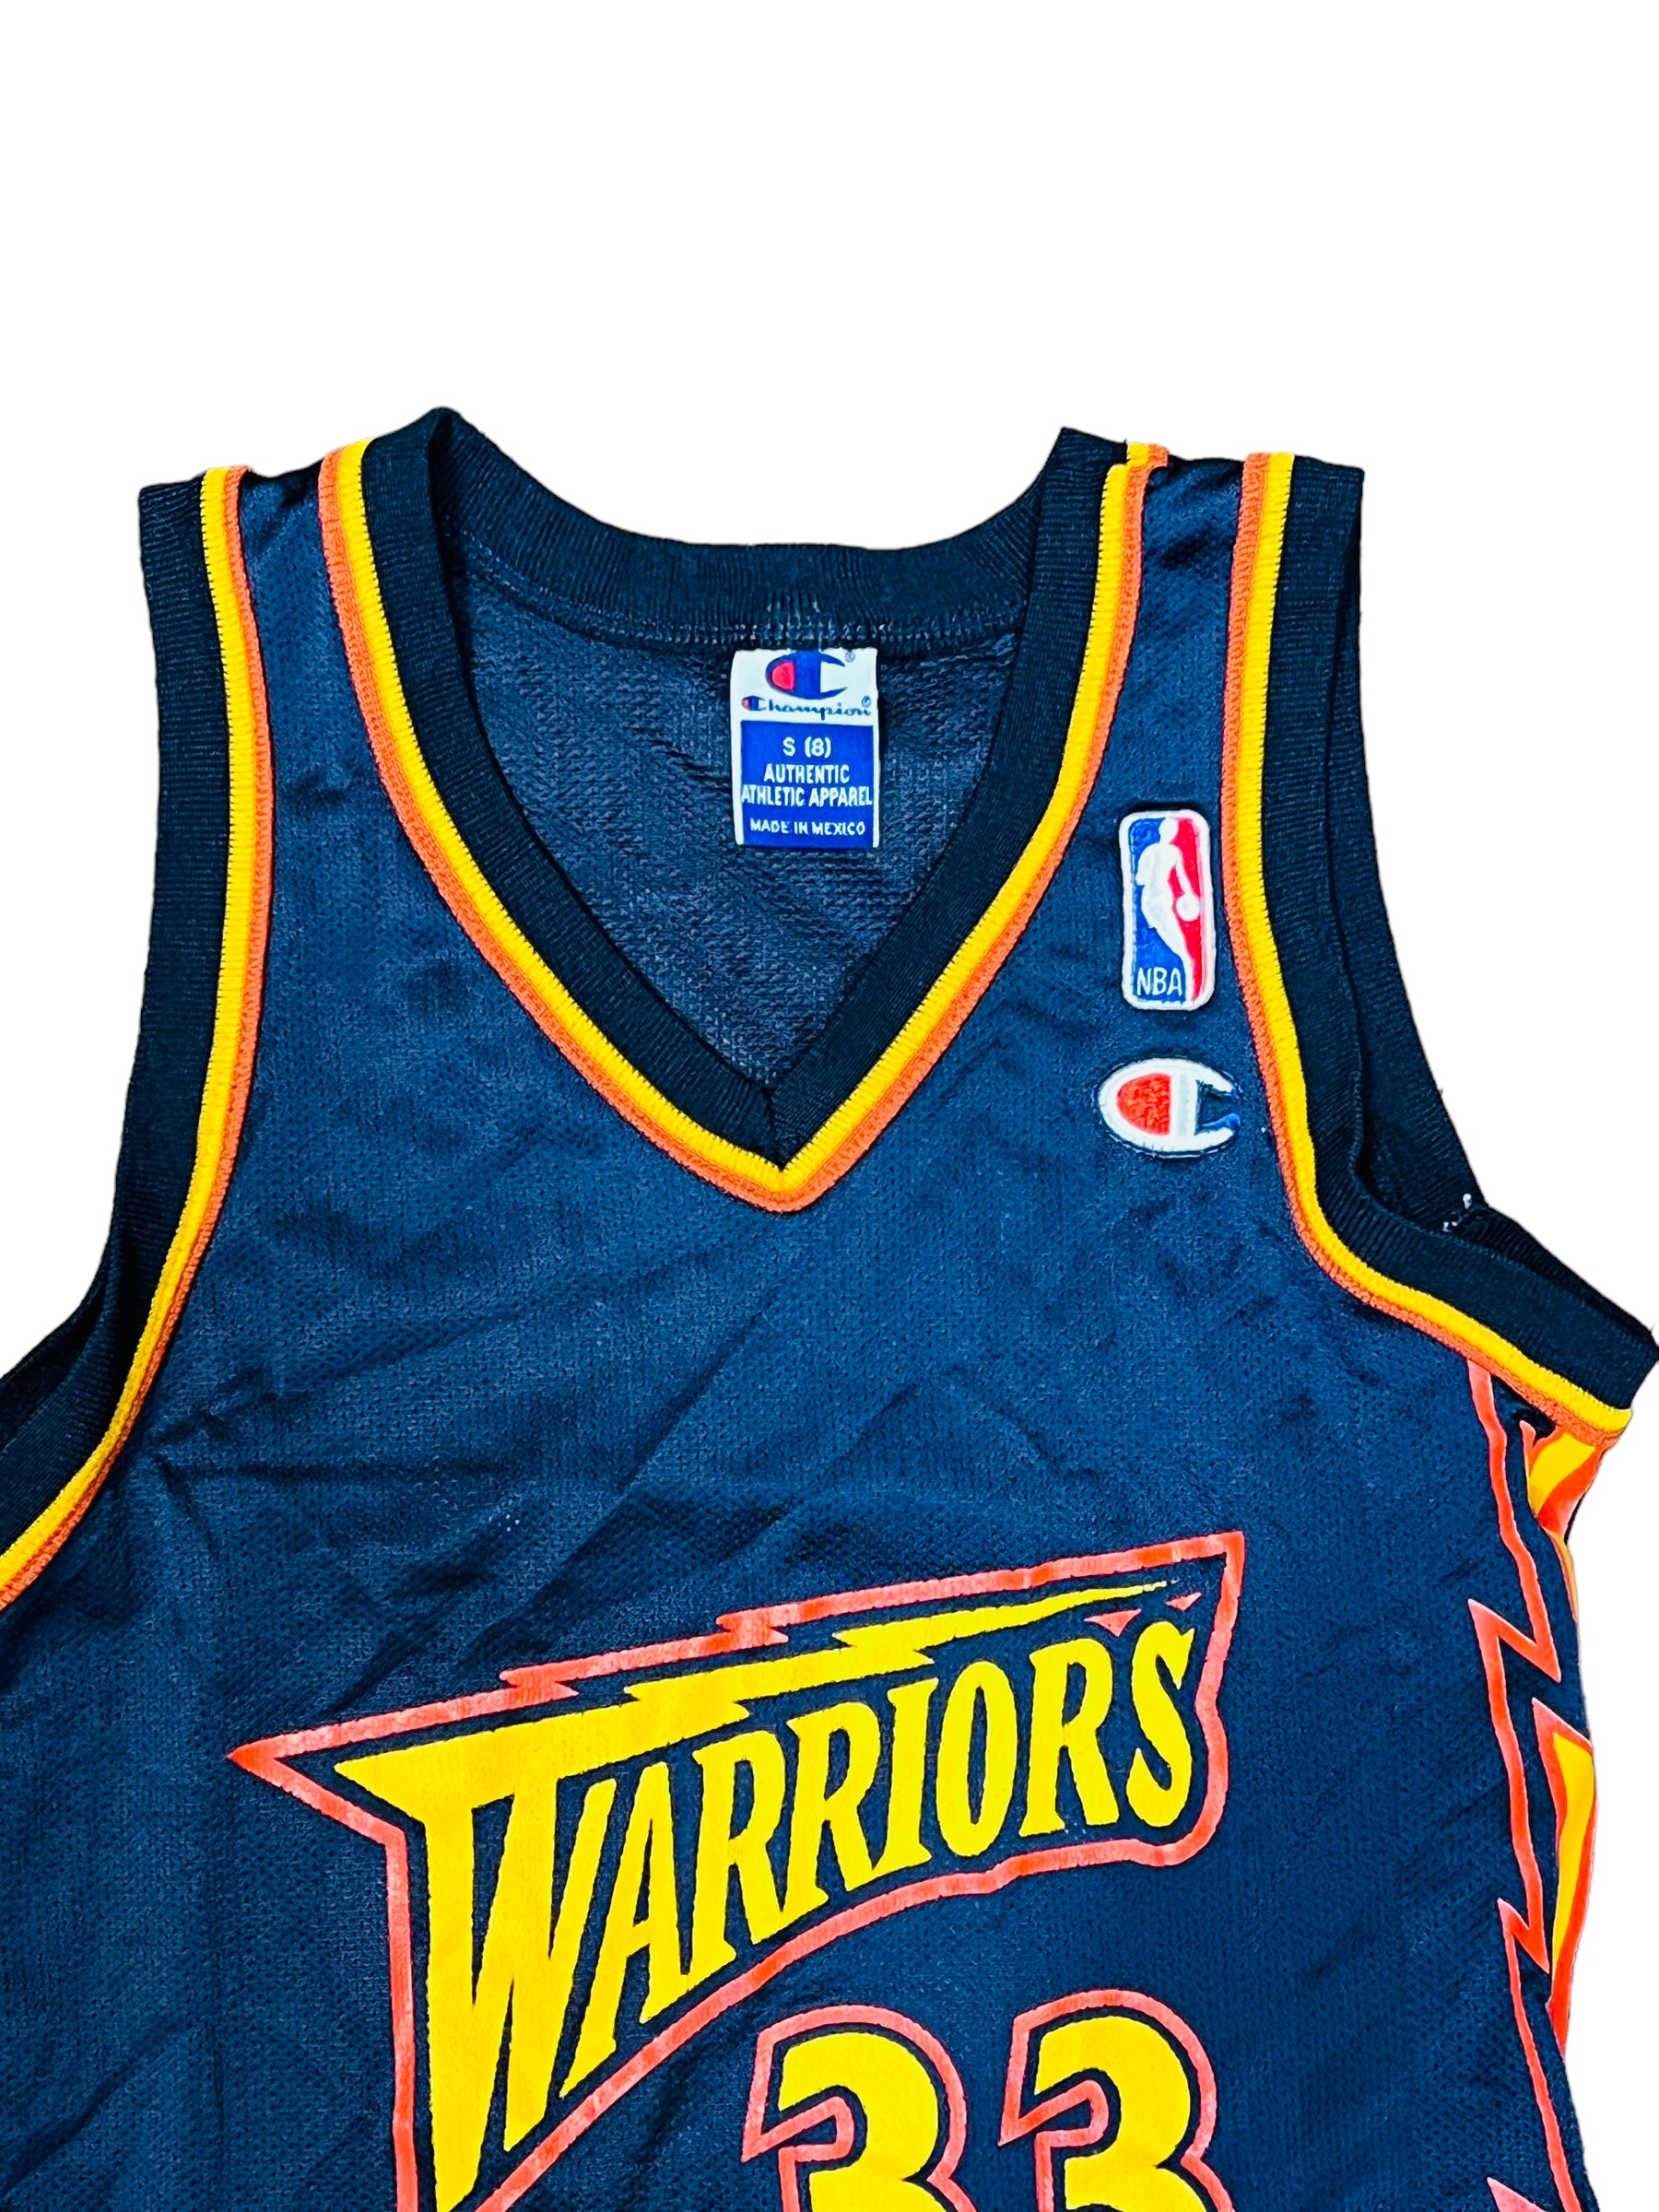 golden state jersey near me